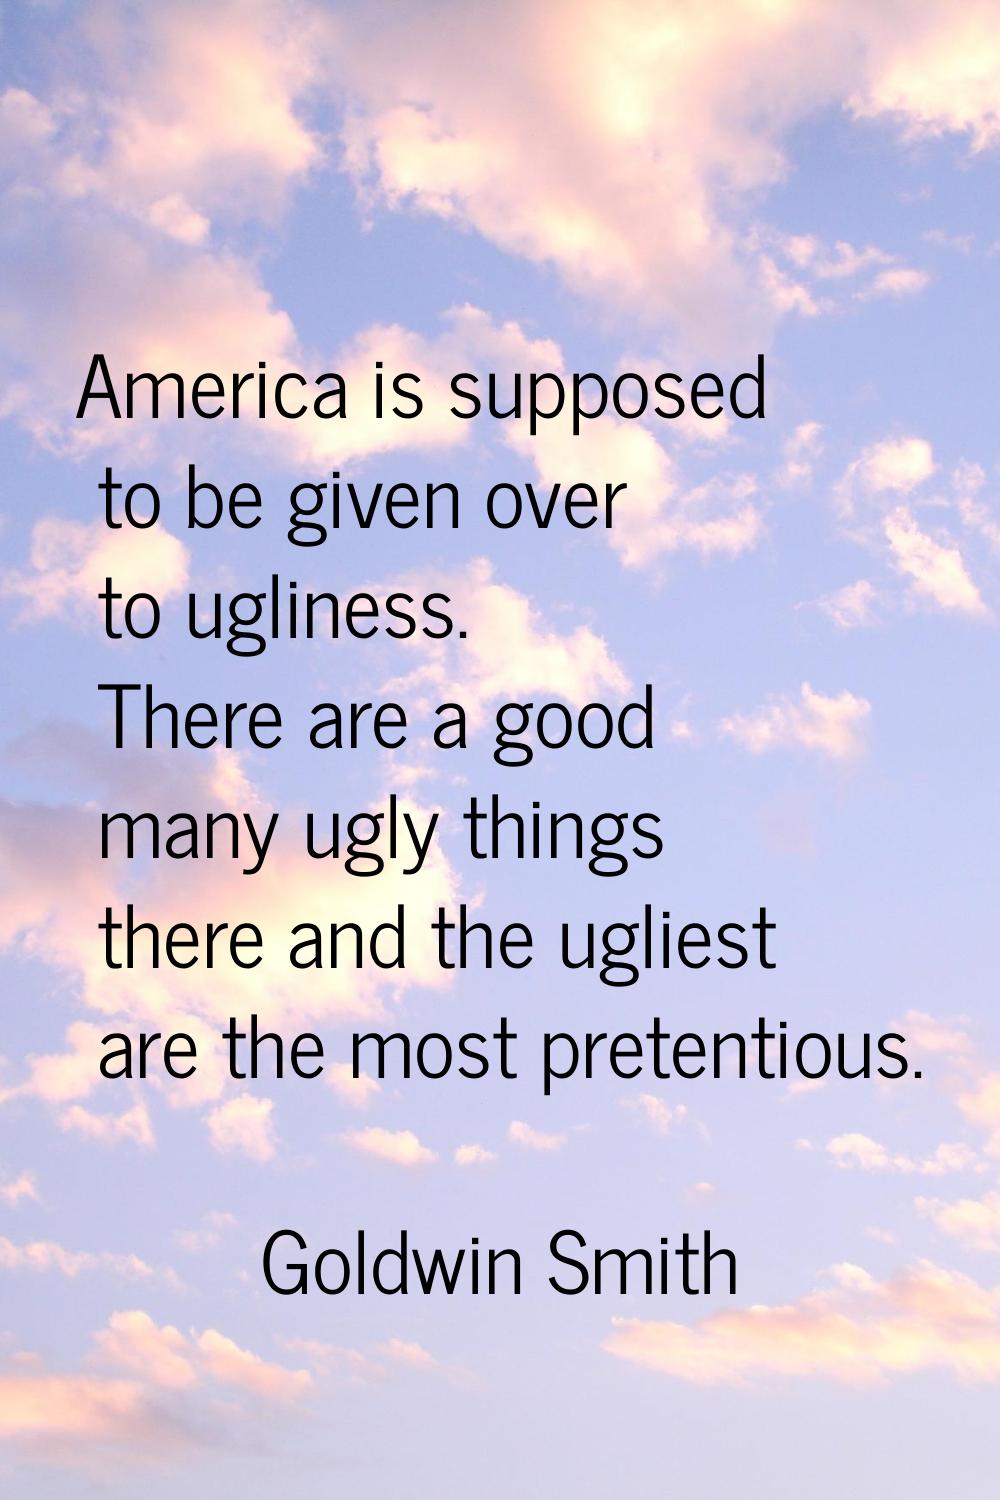 America is supposed to be given over to ugliness. There are a good many ugly things there and the u